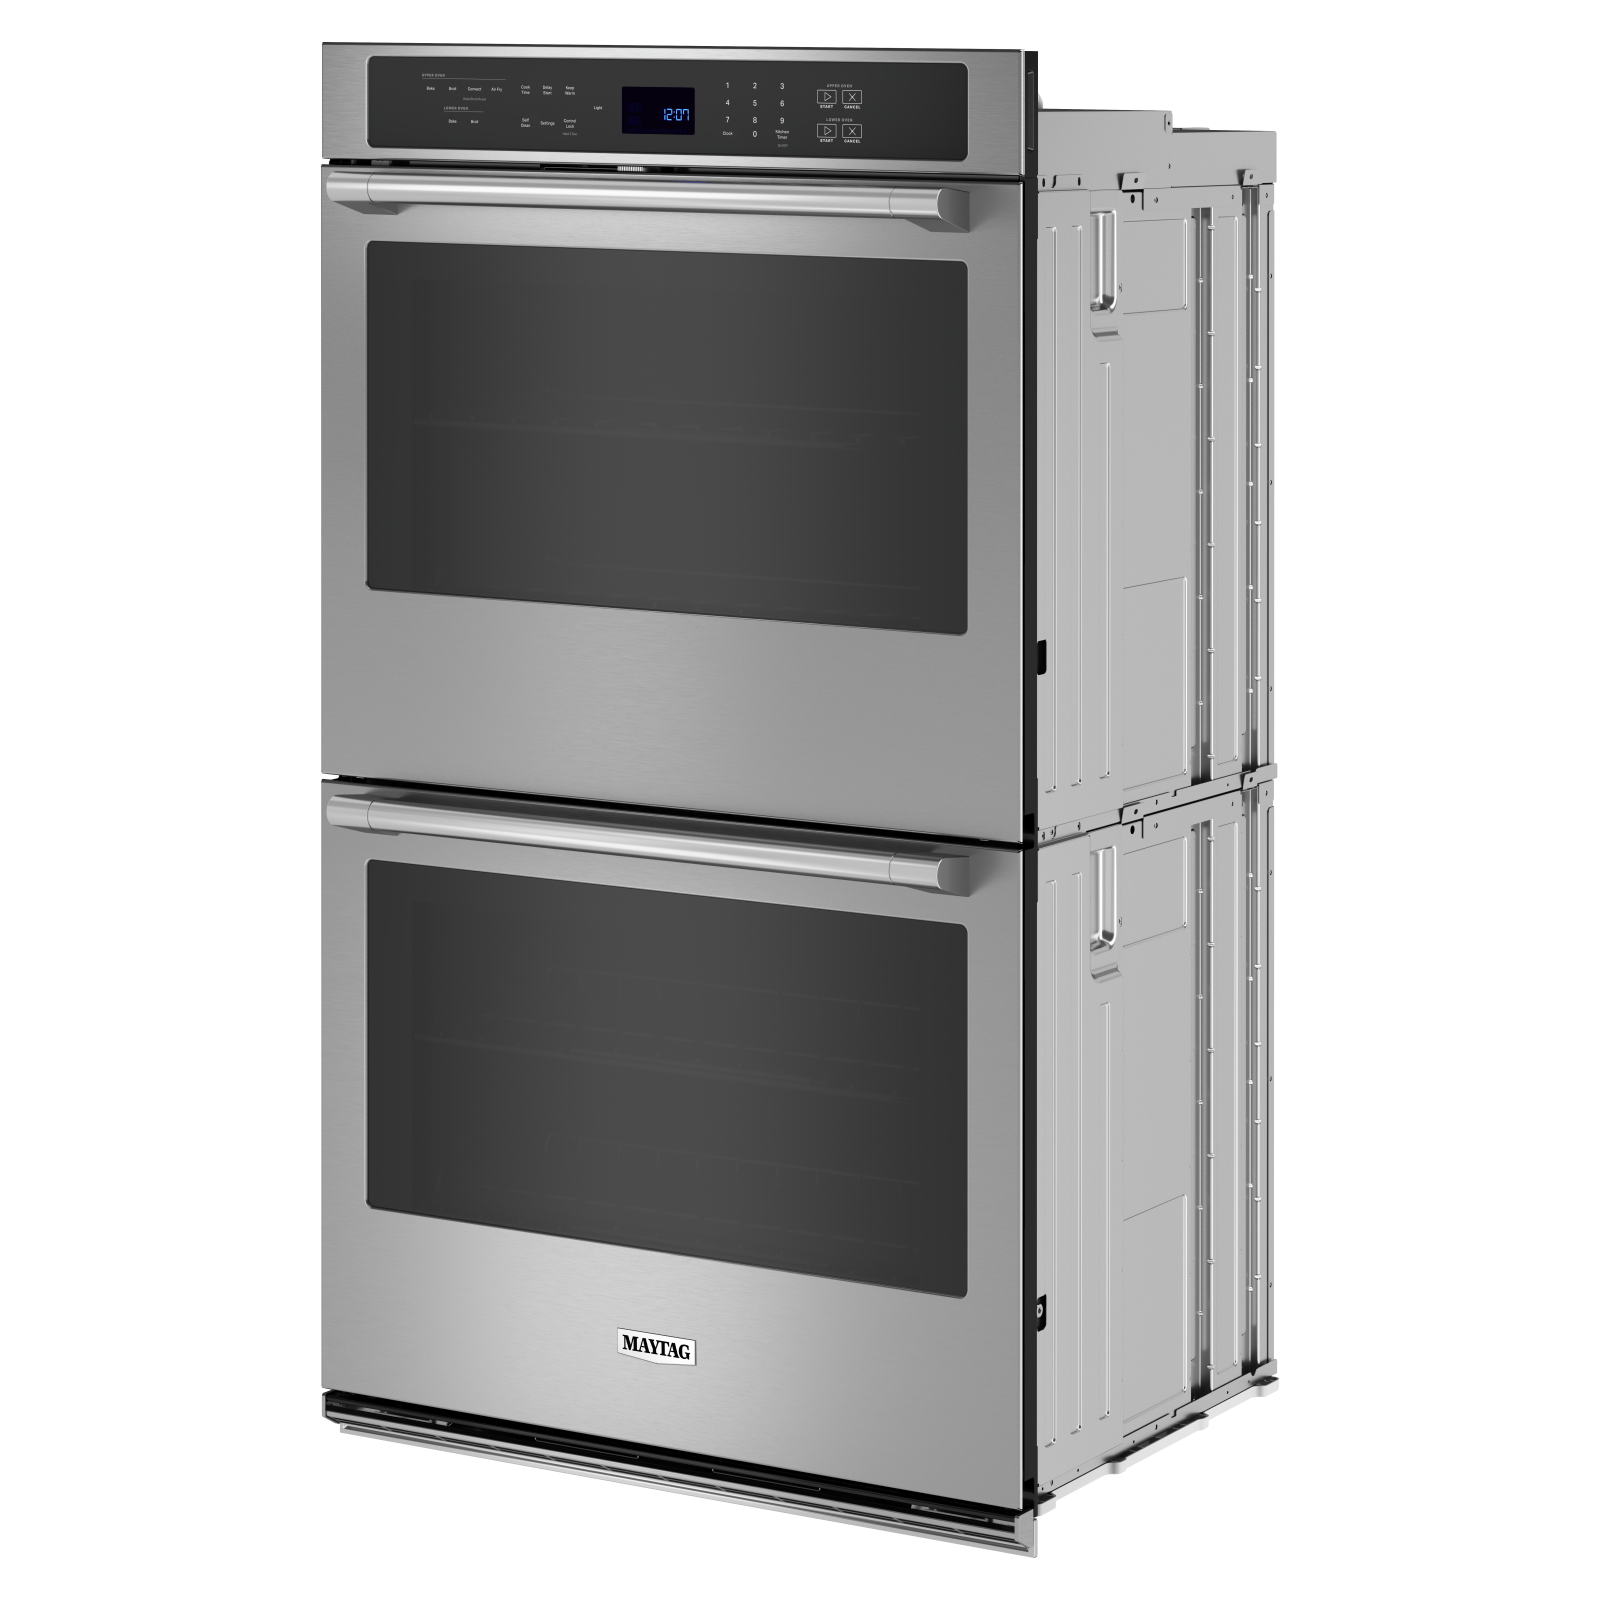 Maytag - 10 cu. ft Double Wall Oven in Stainless - MOED6030LZ